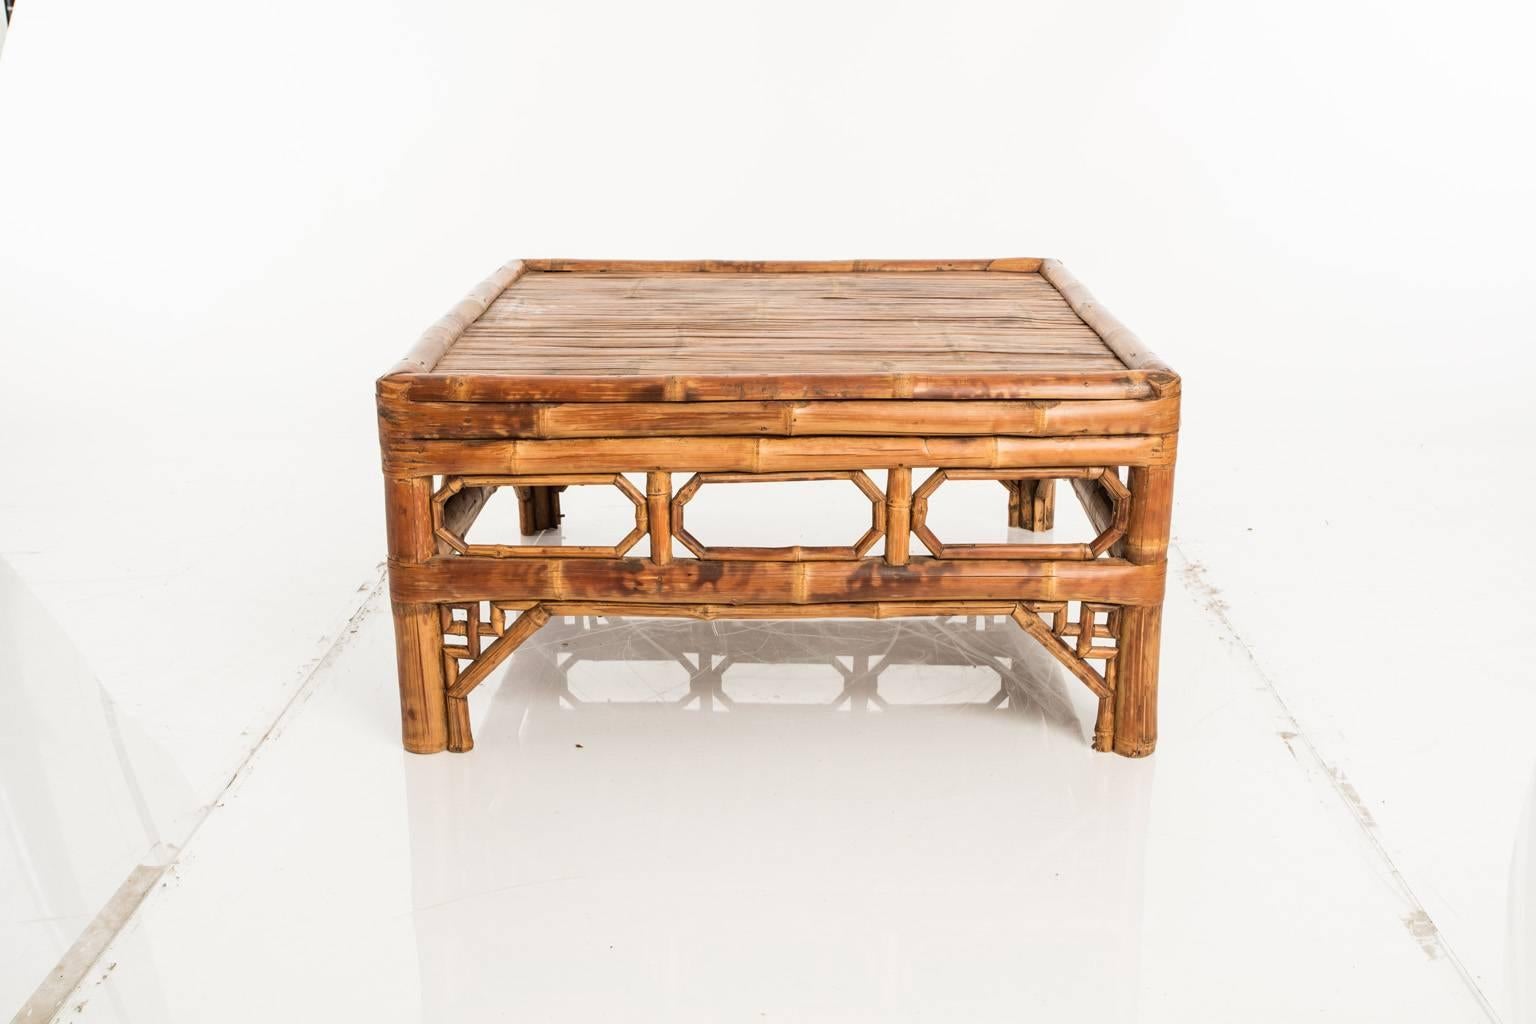 Vintage, square bamboo coffee table.